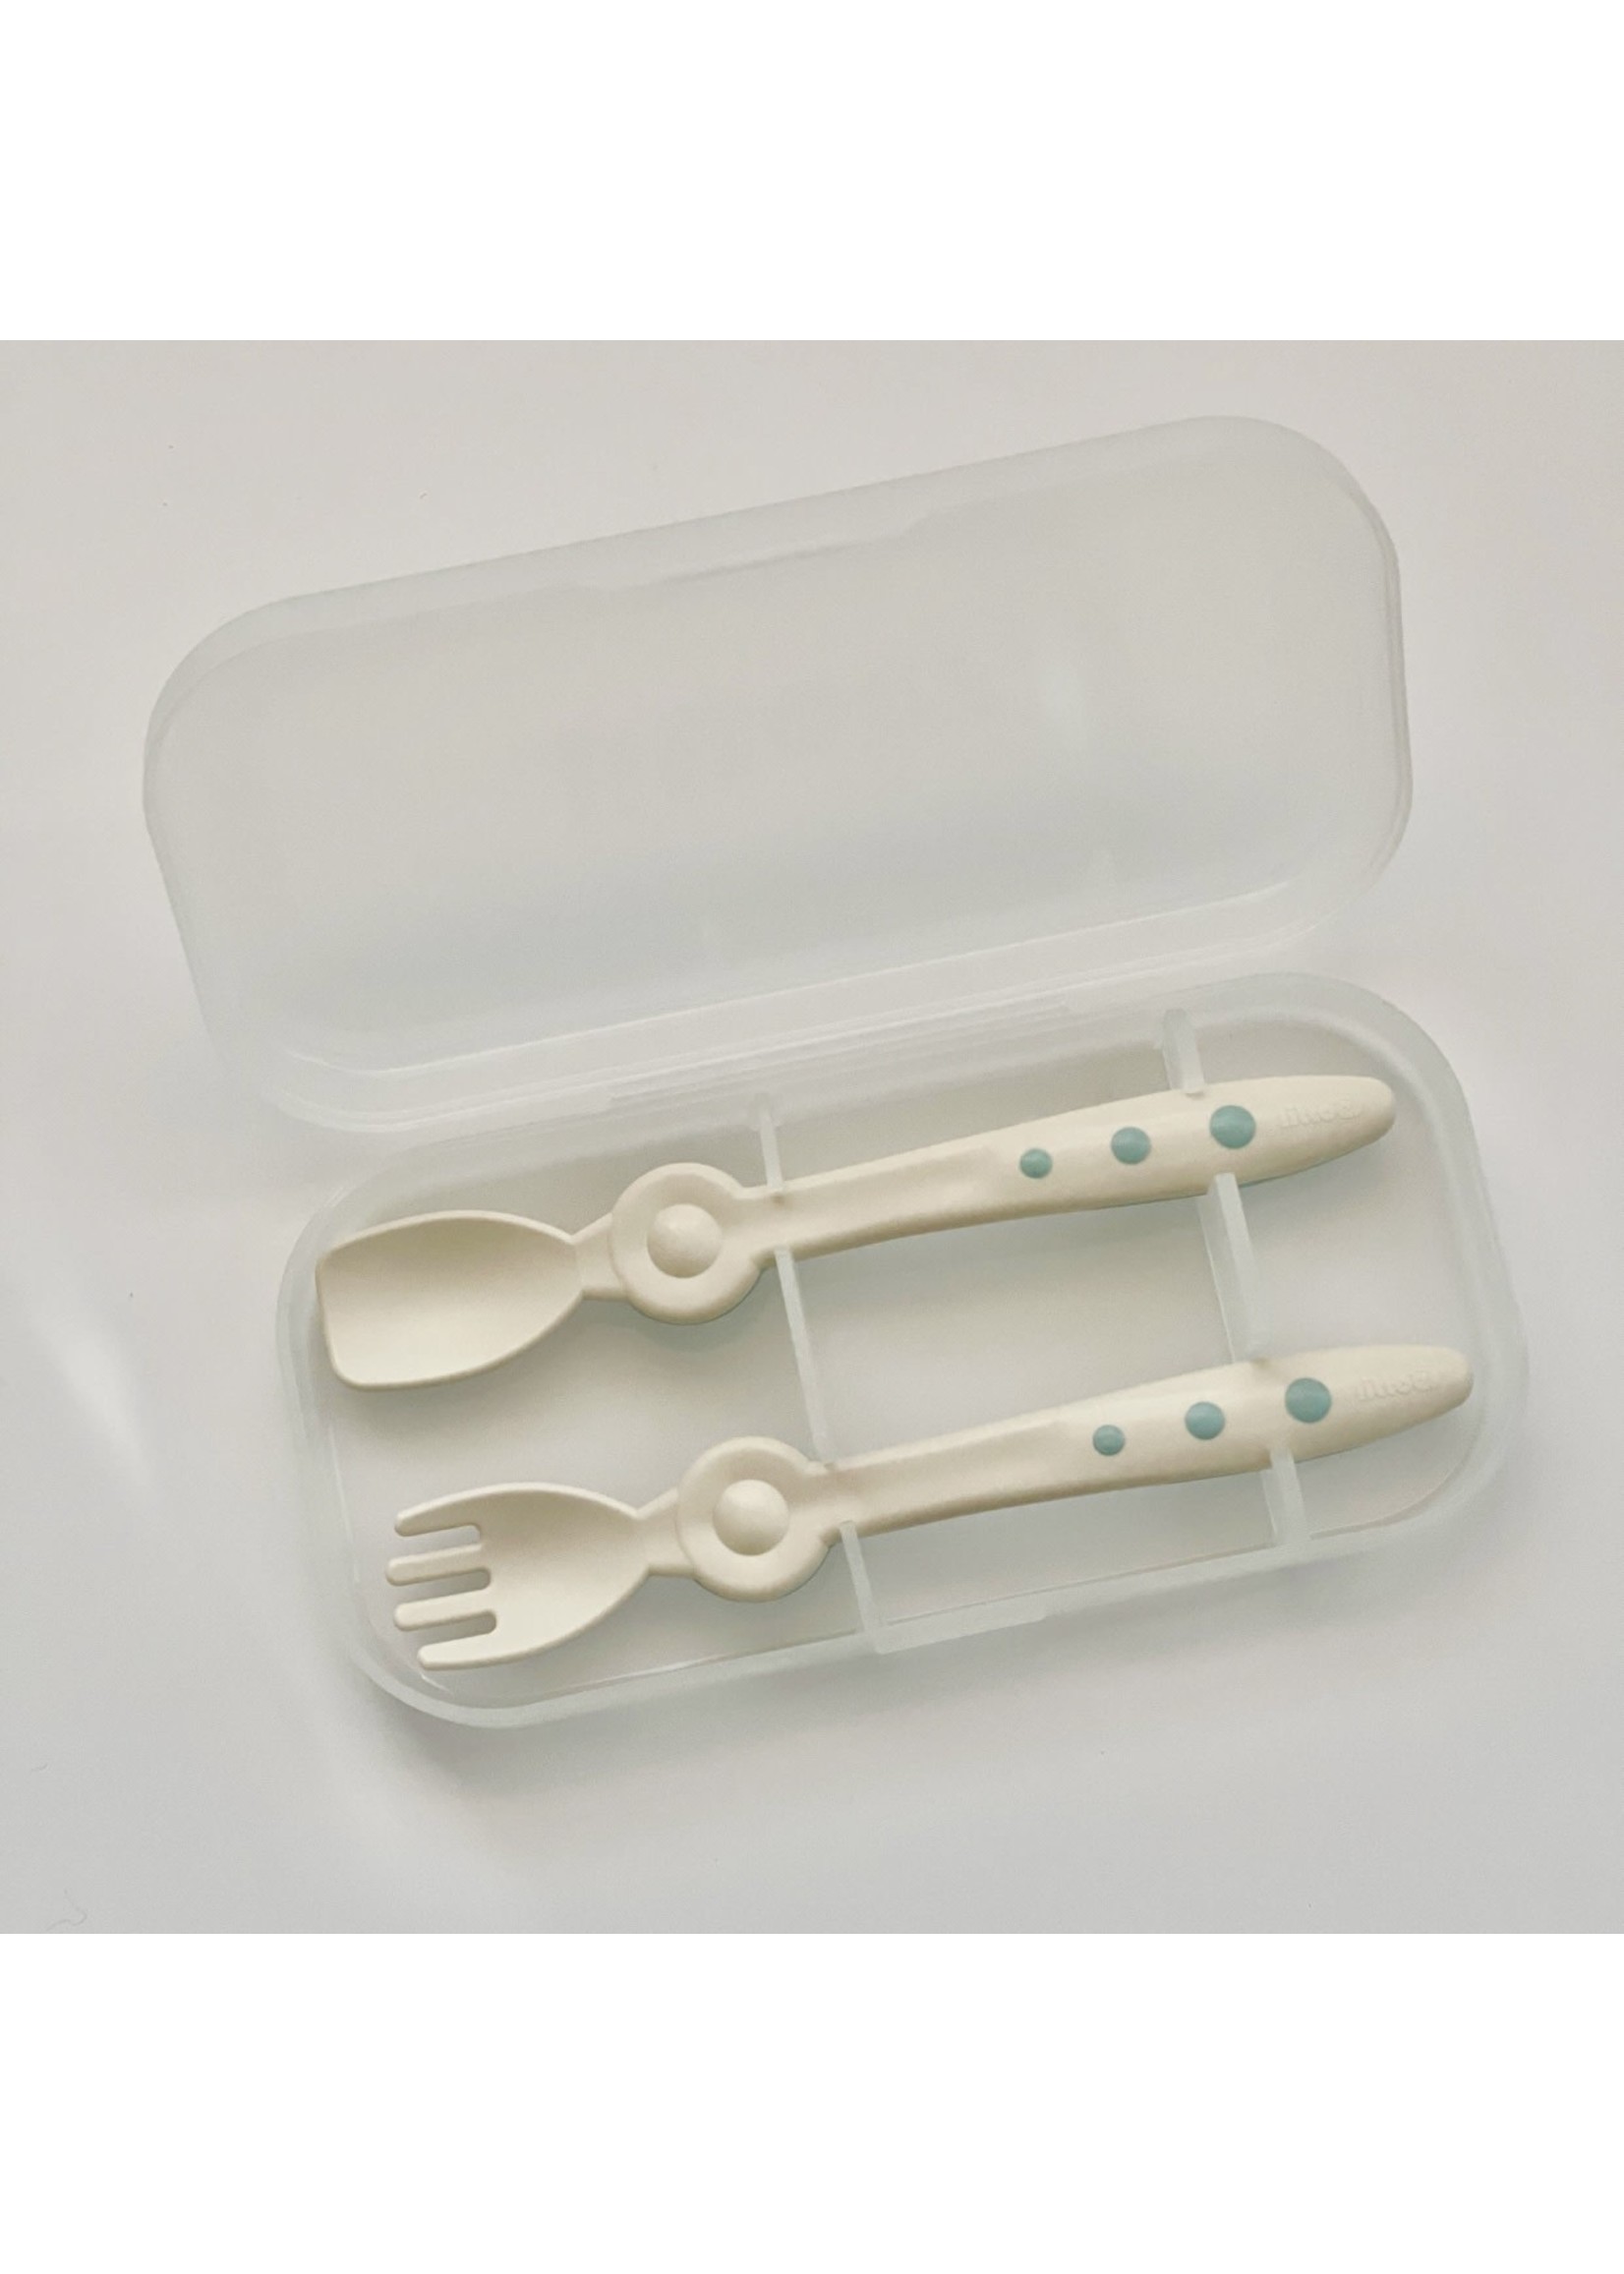 Littoes Stay Clean Cutlery Set